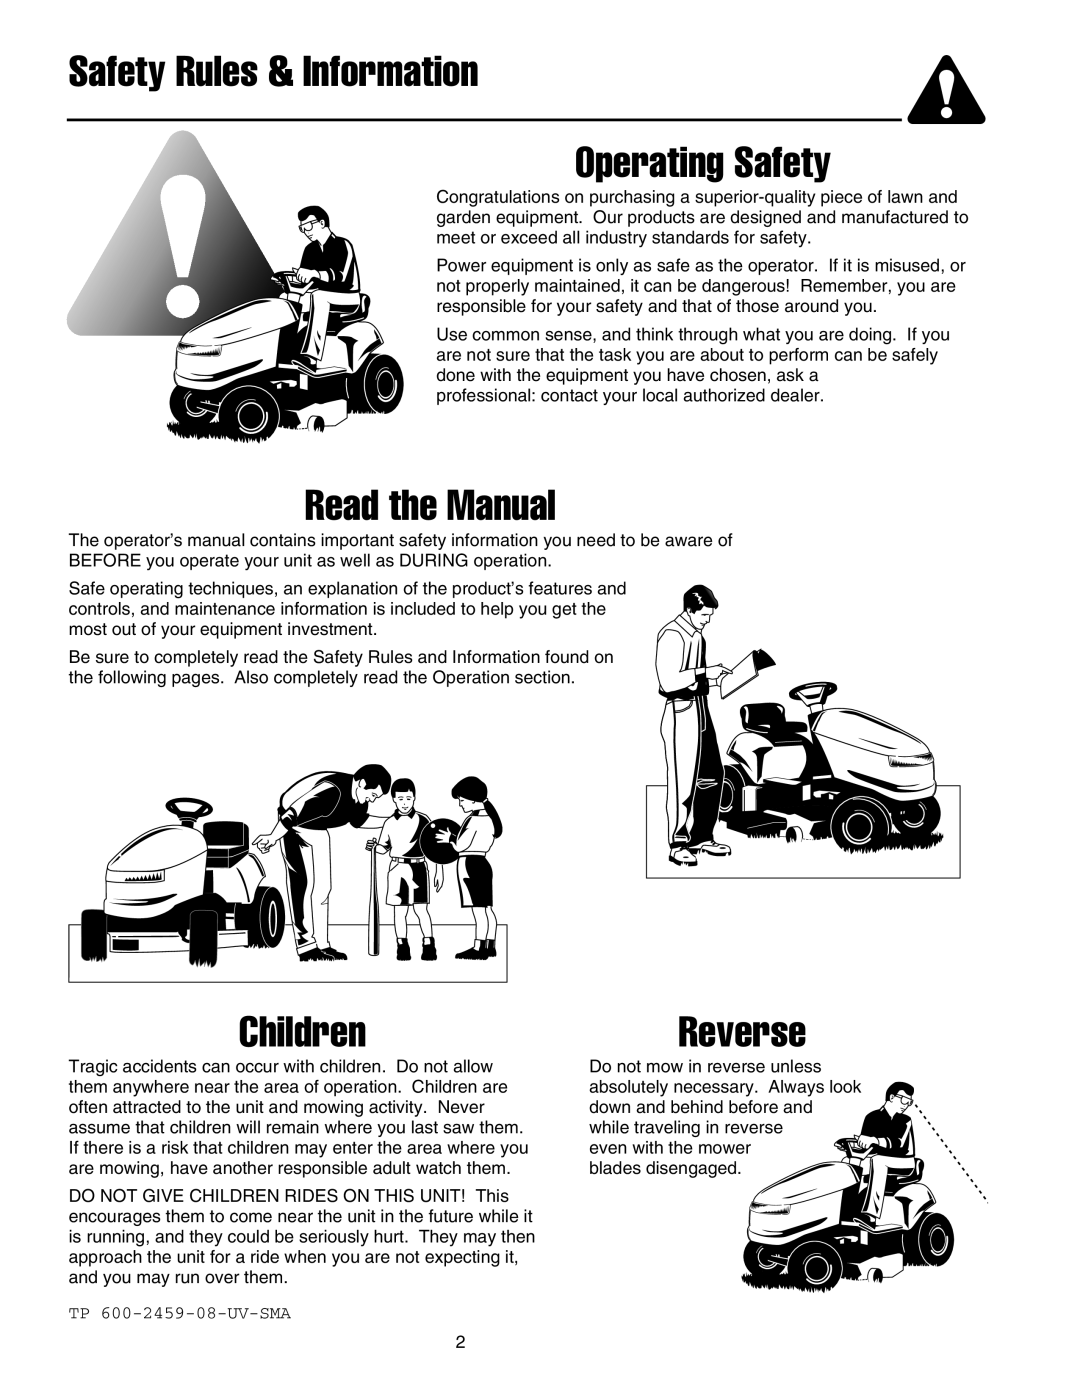 Snapper XL Series manual Safety Rules & Information Operating Safety, Read the Manual, ChildrenReverse 